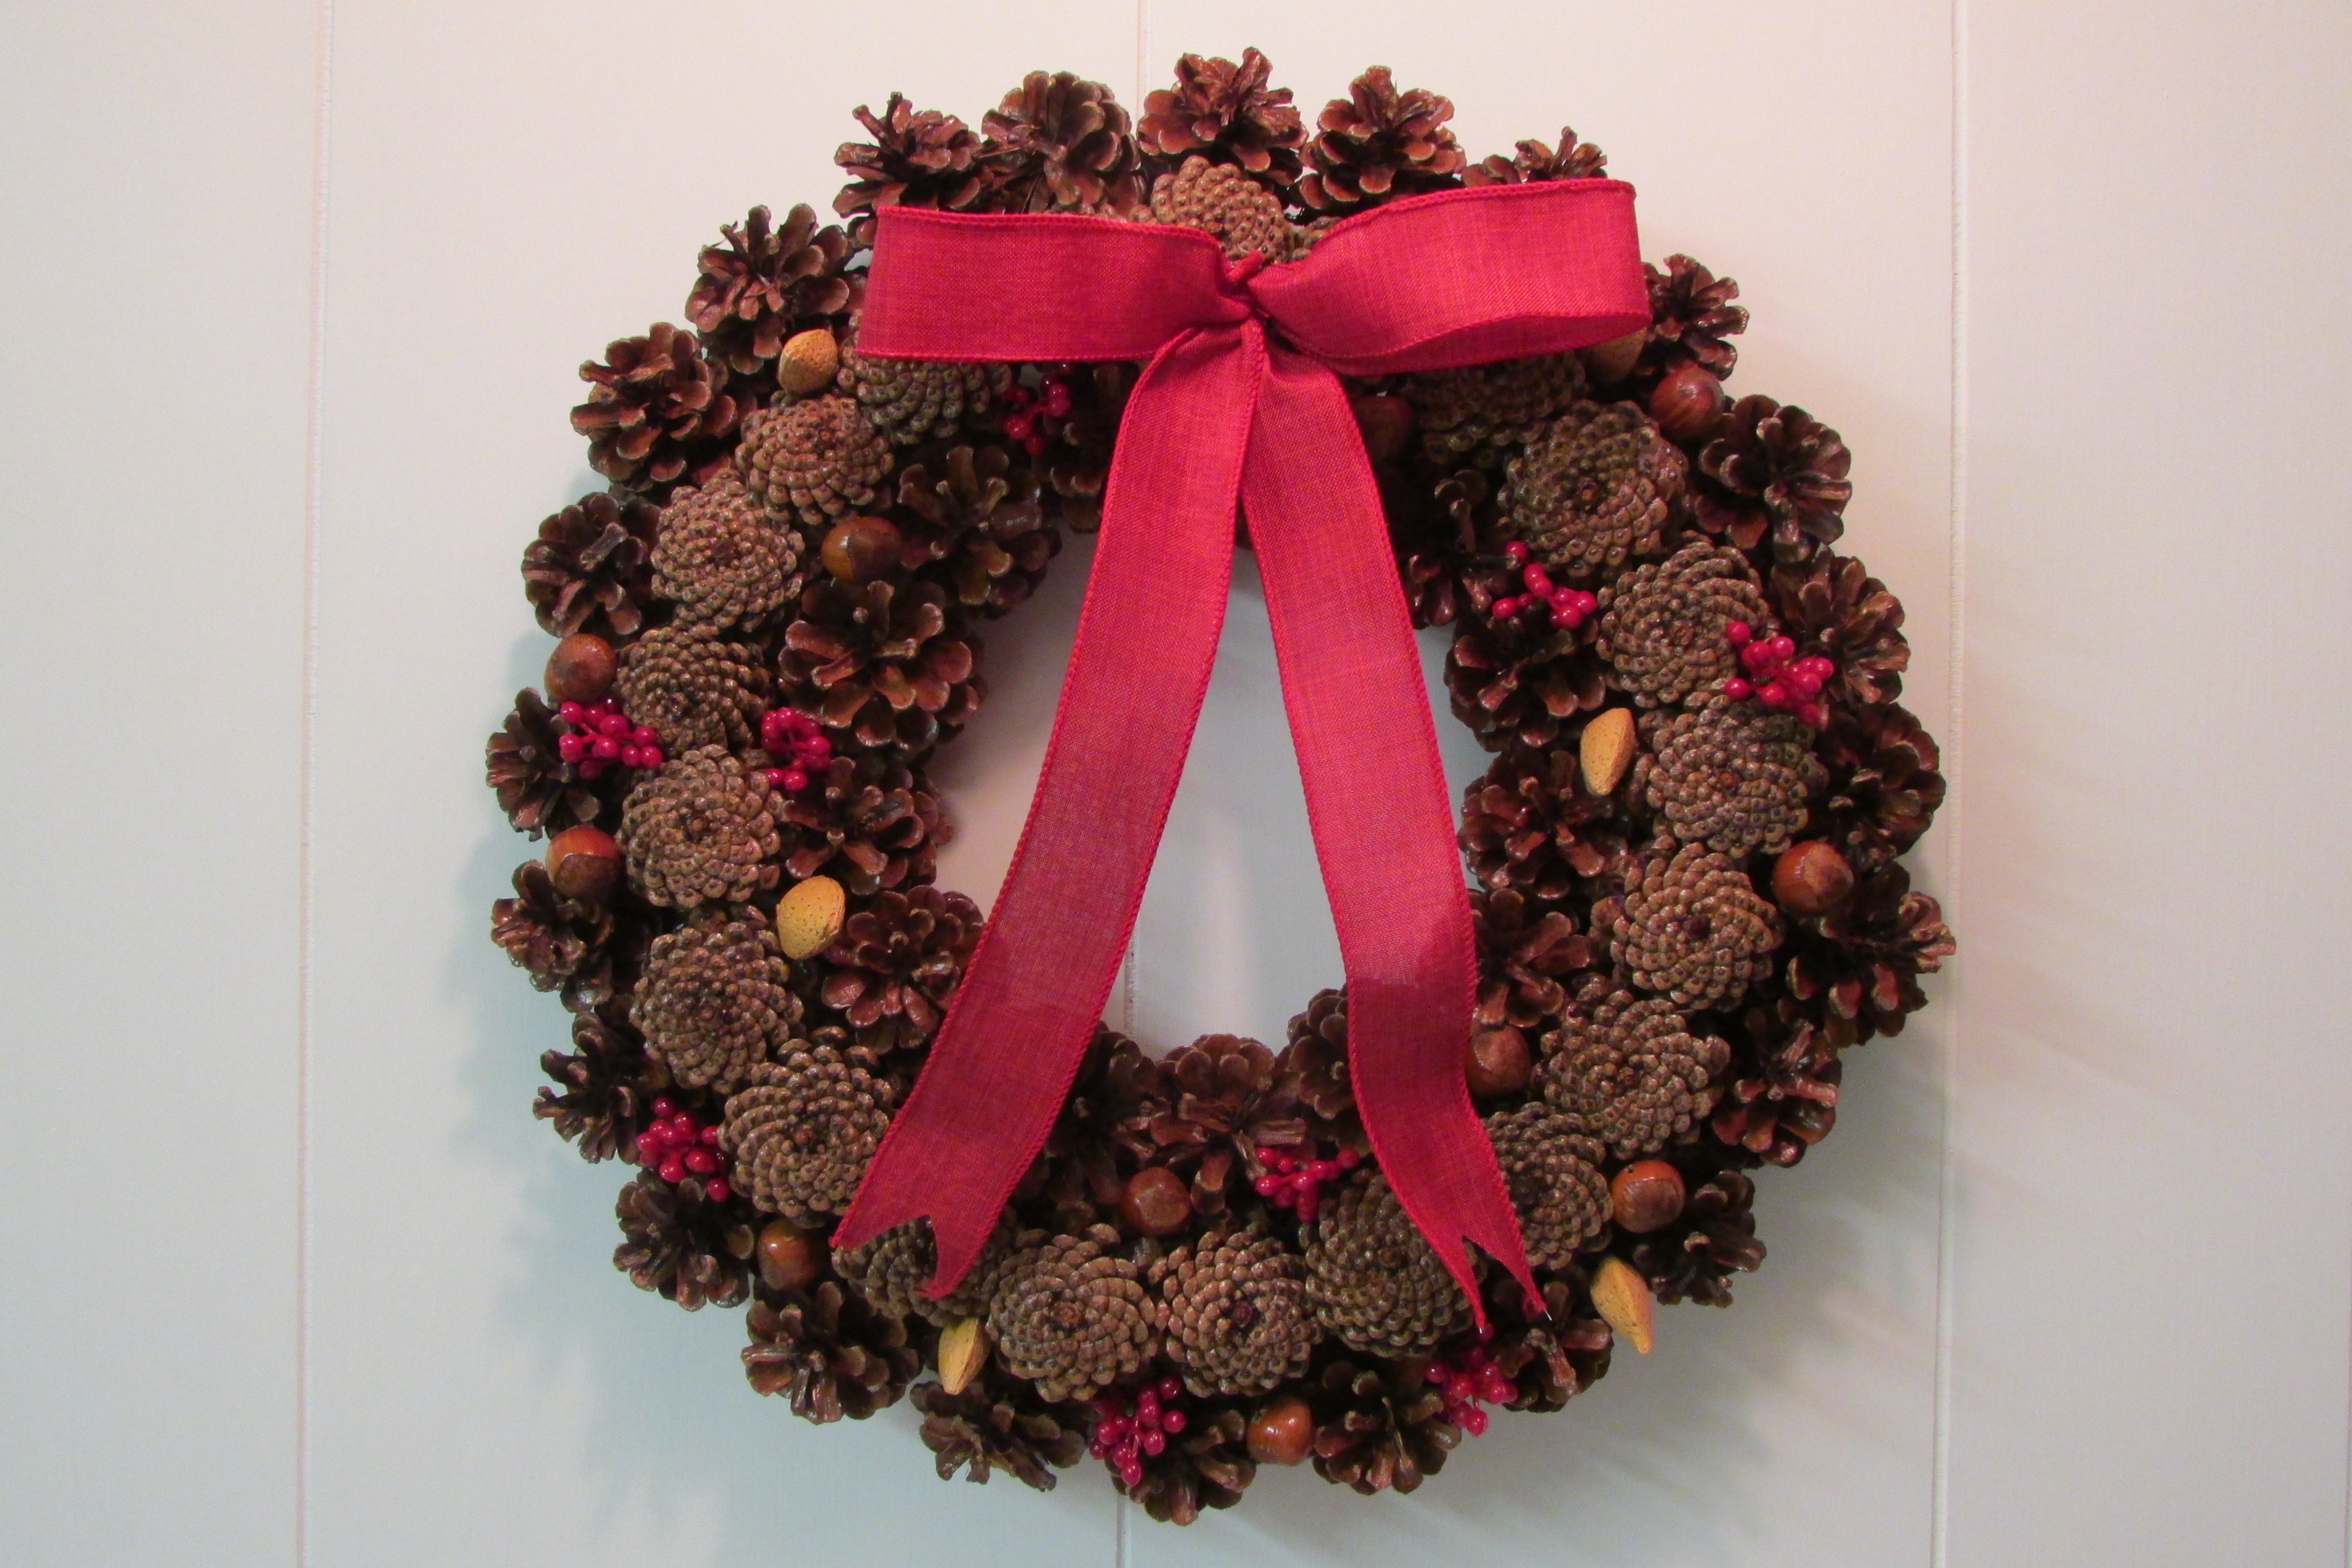 How to make a Pine Cone Christmas Wreath | Fred Gonsowski Garden Home